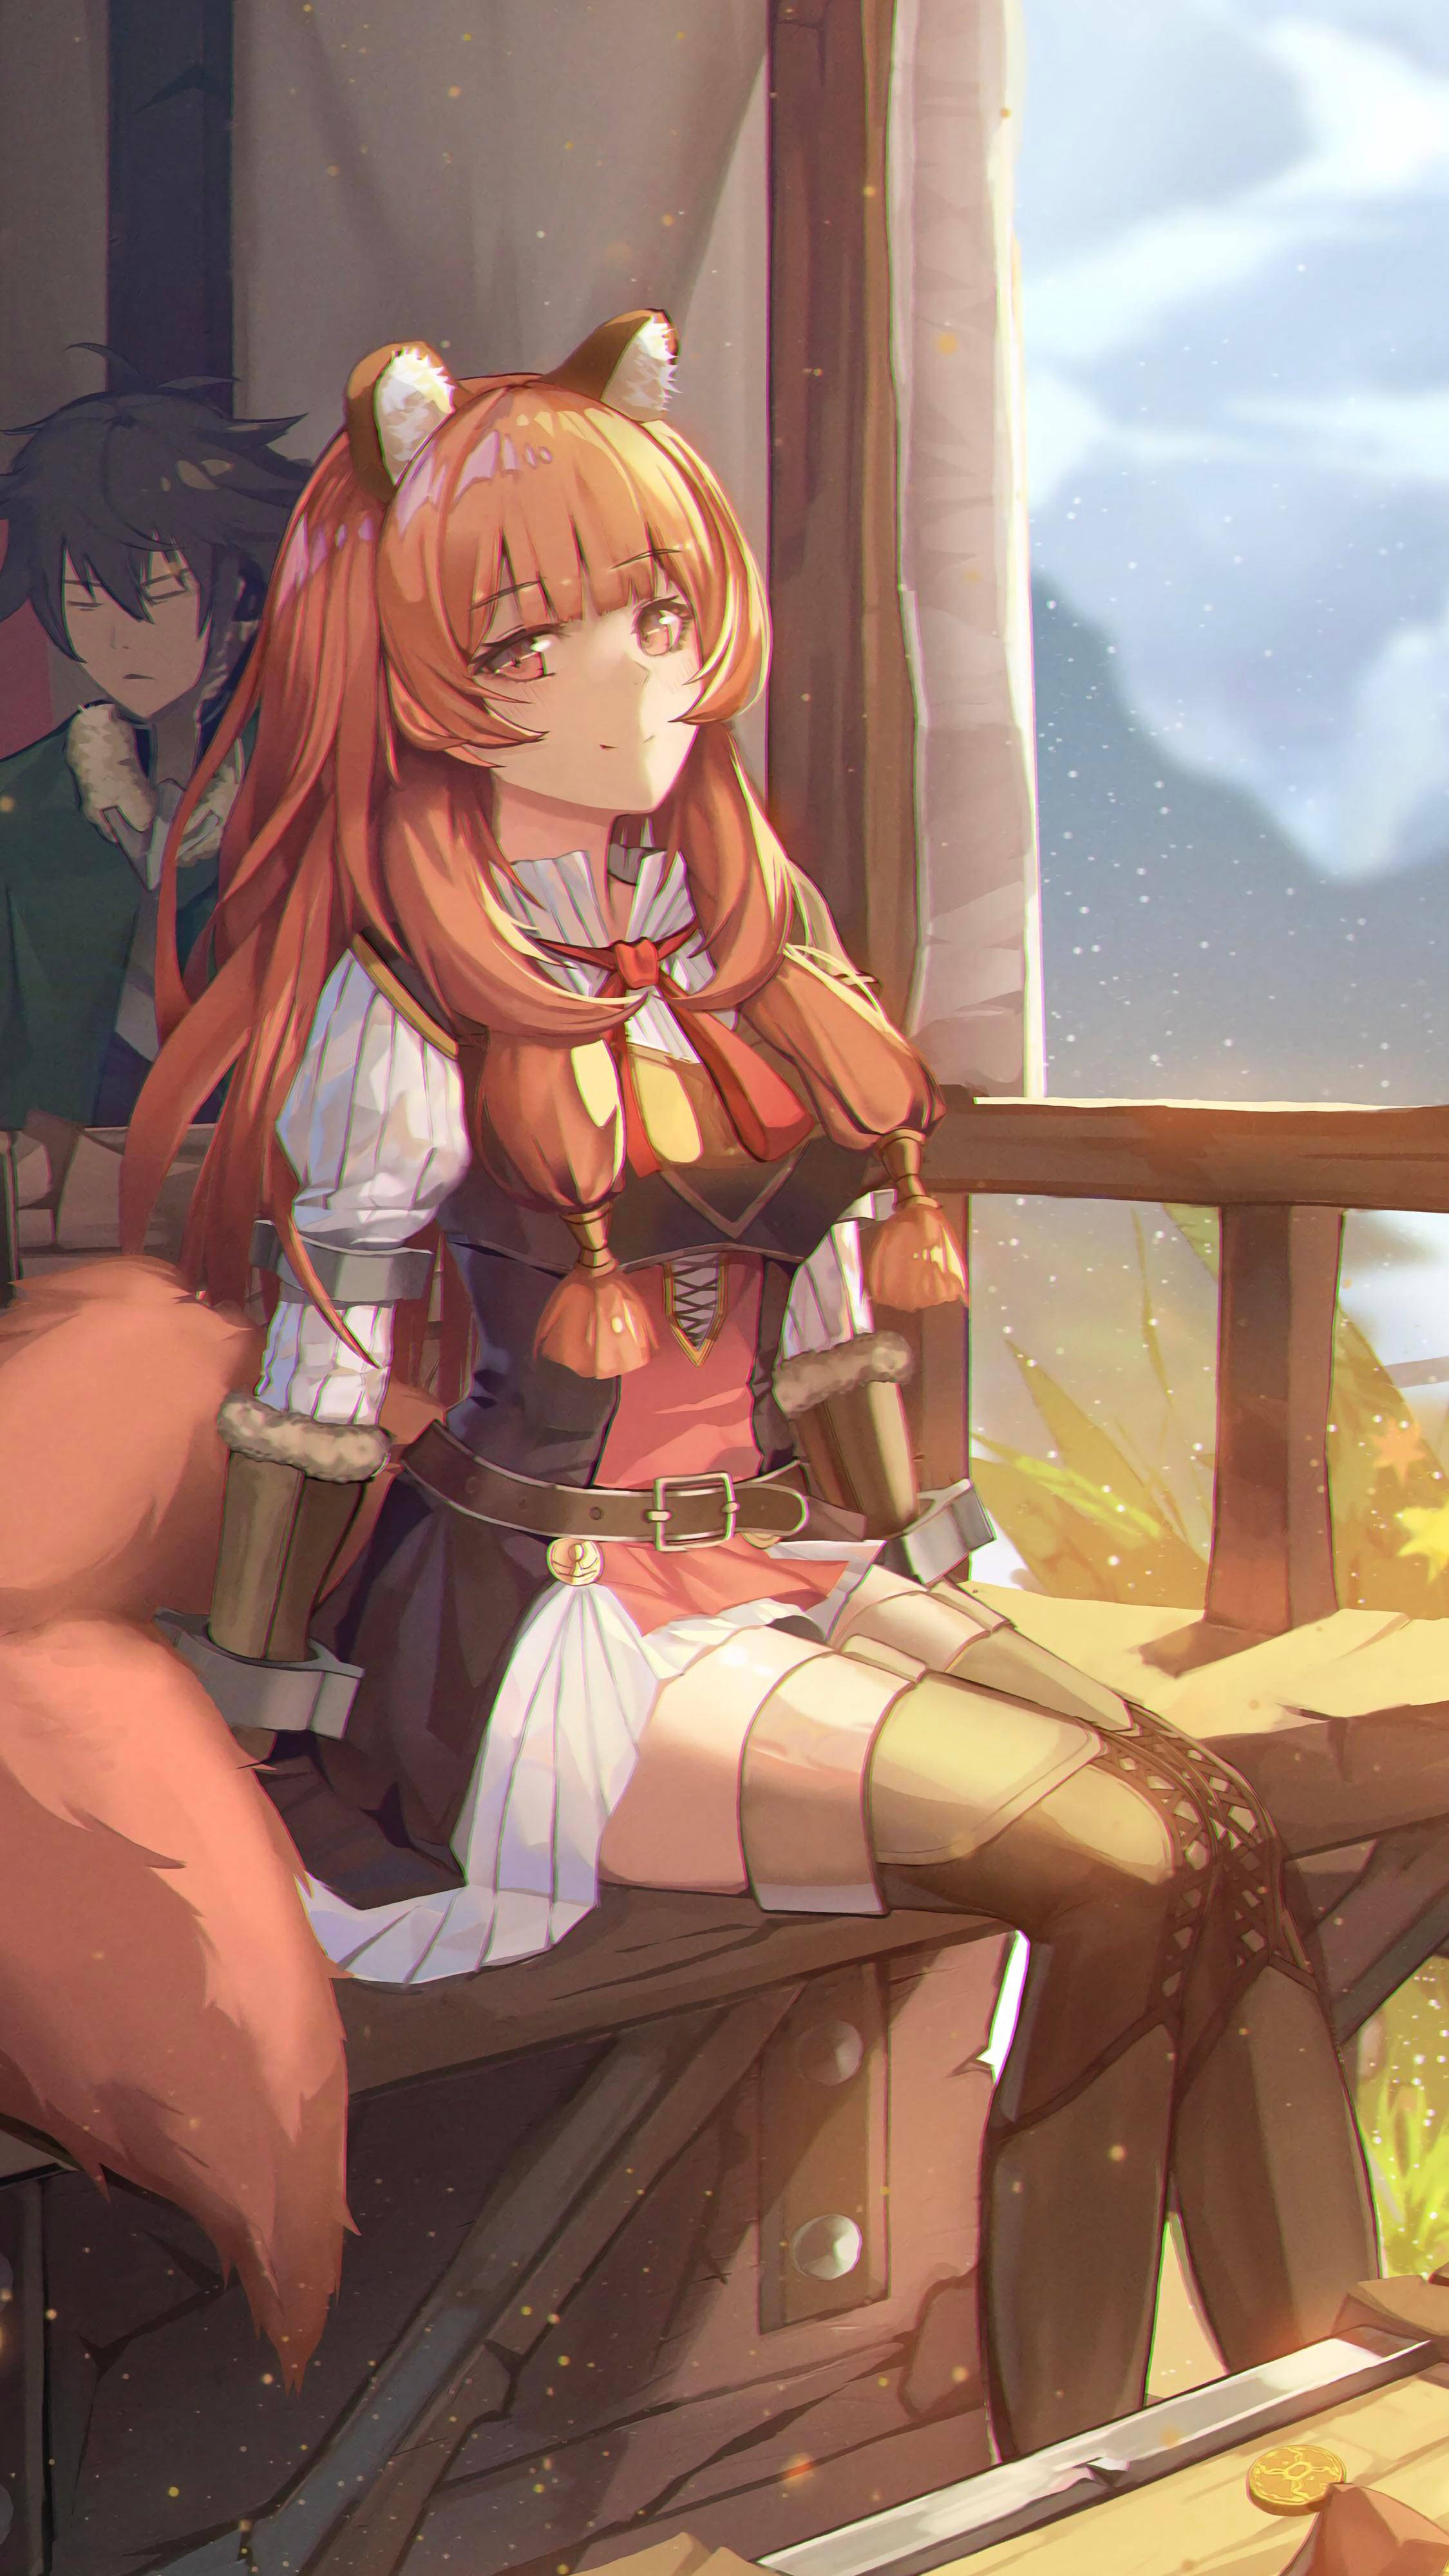 A Girl Sitting On A Bench With A Fox Background